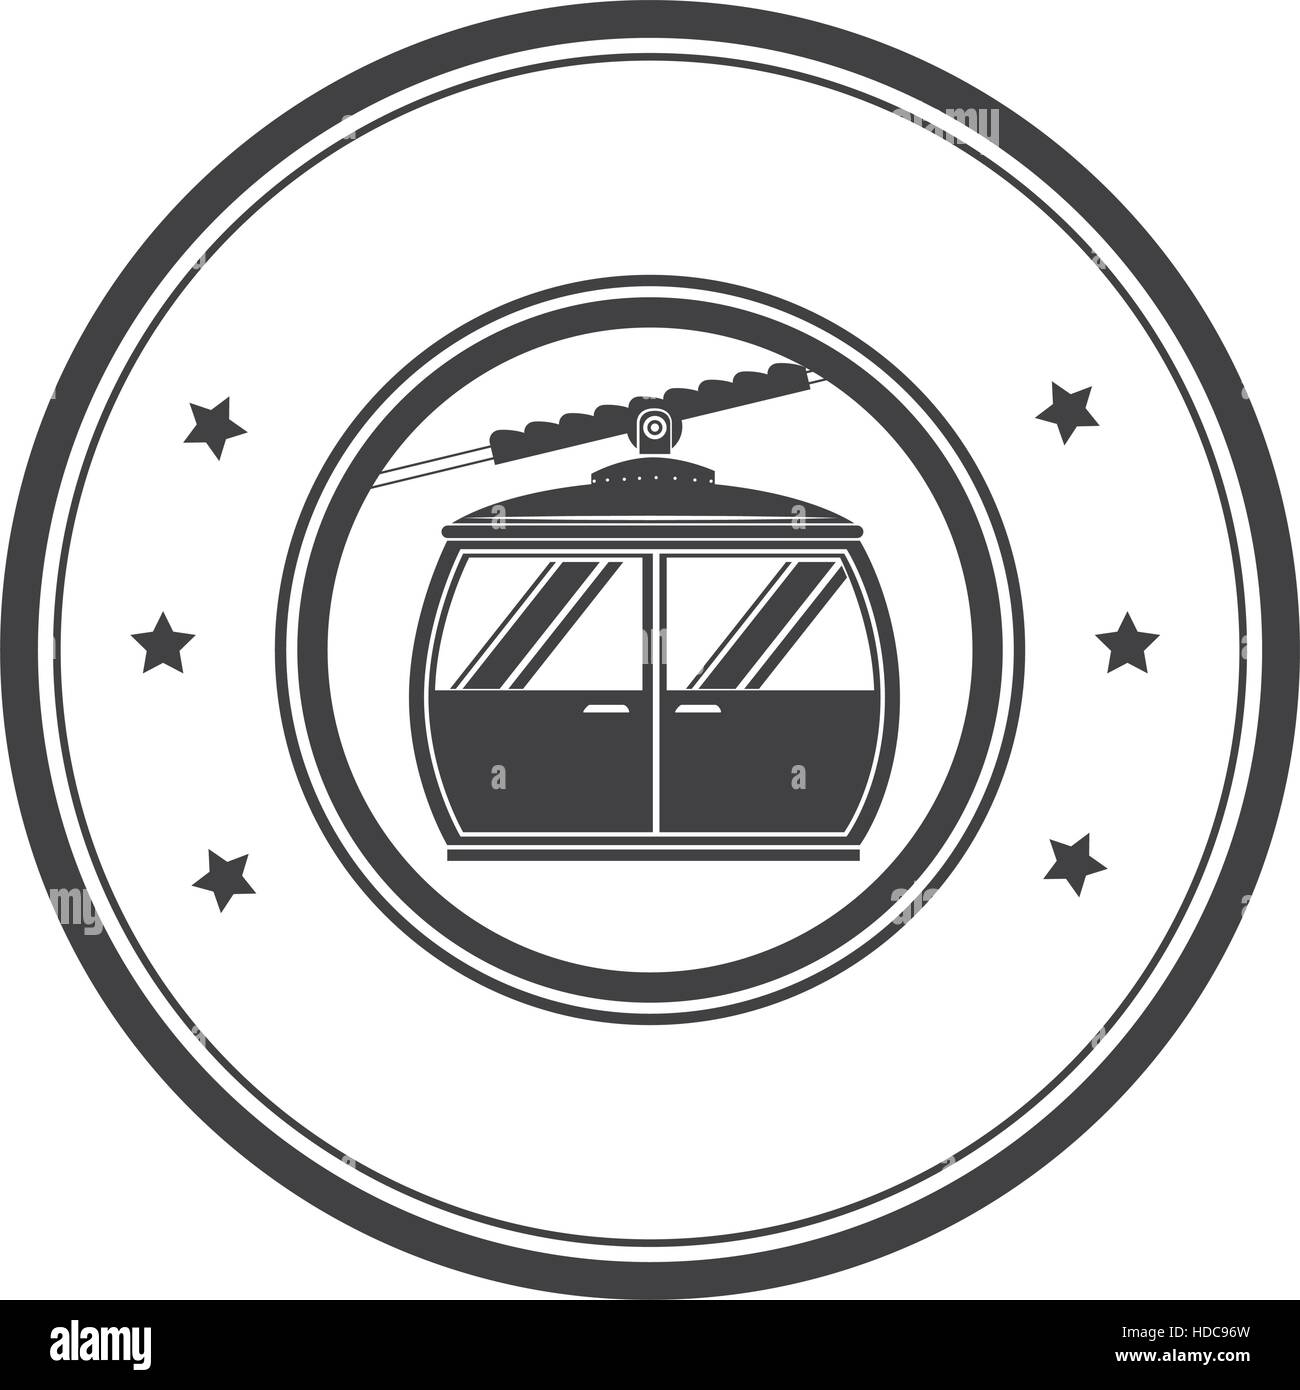 cableway emblem isolated icon vector illustration design Stock Vector